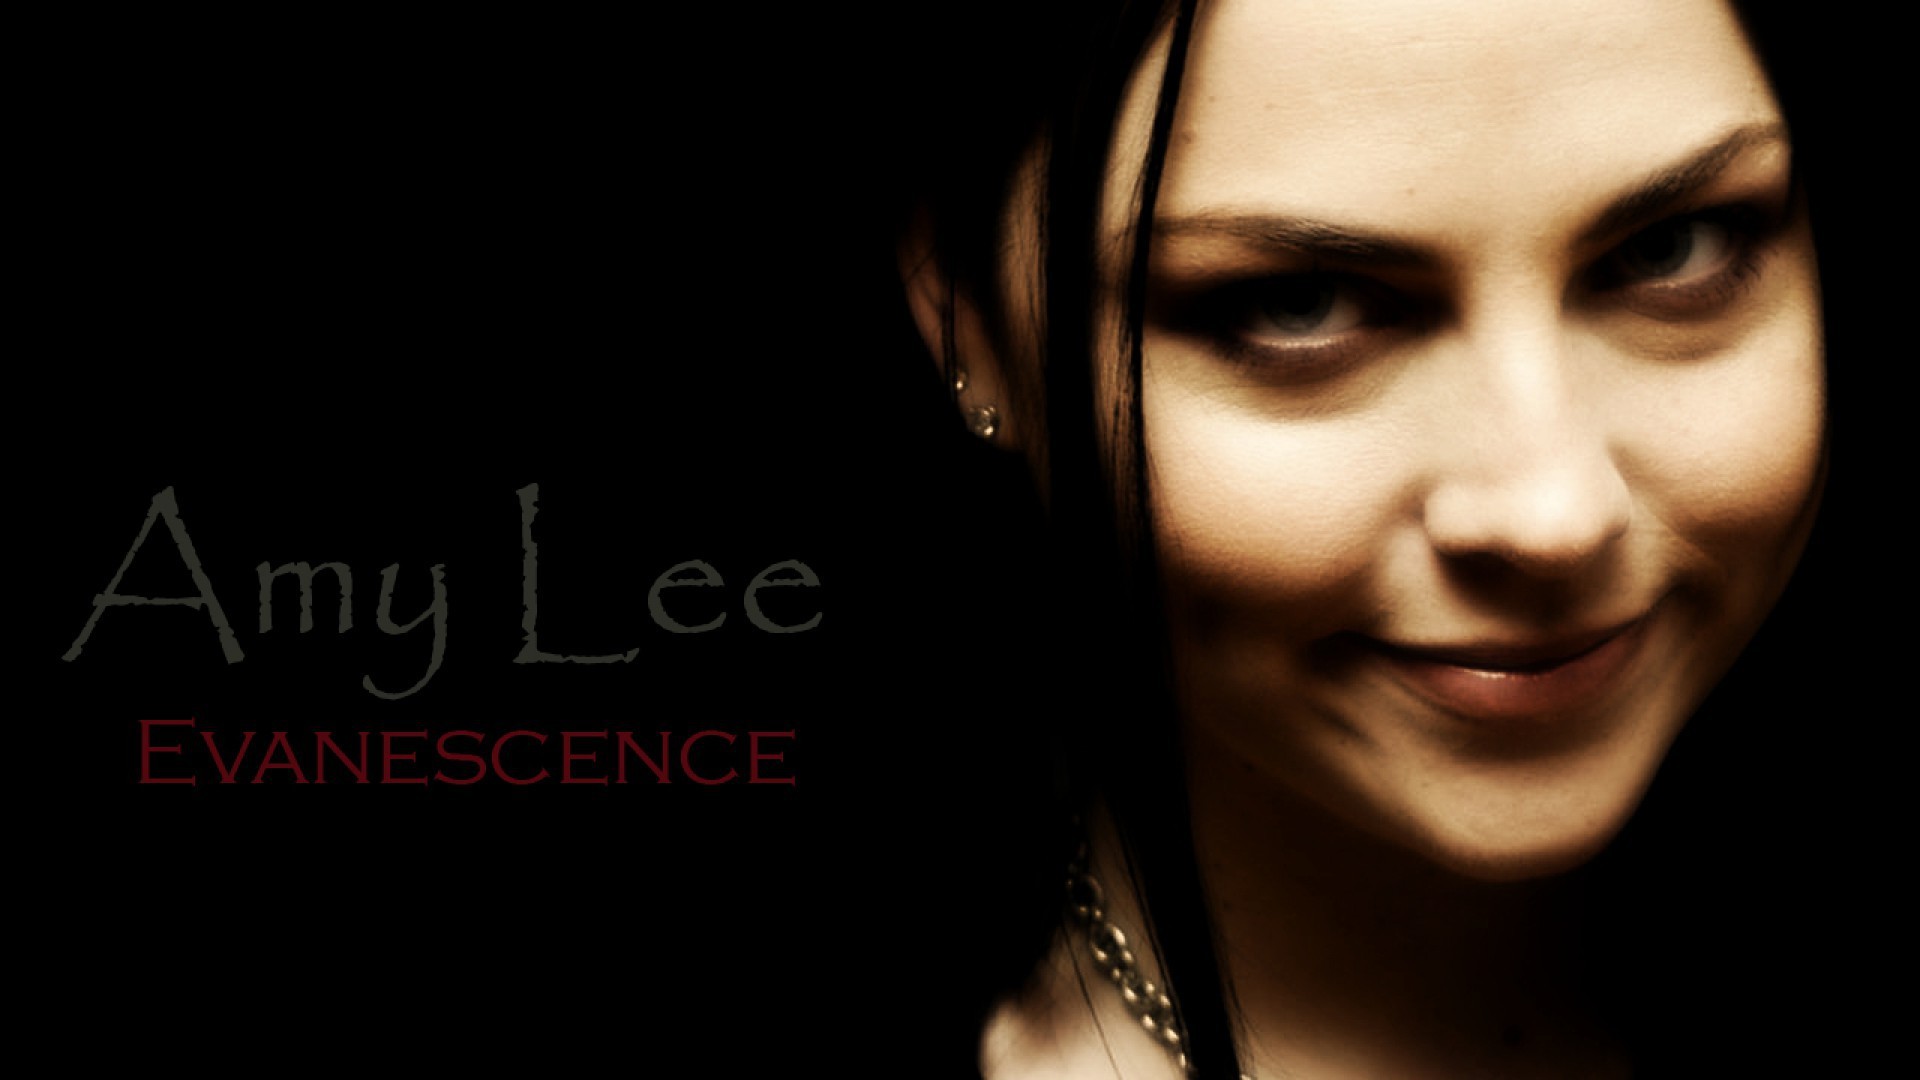 1920x1080 Amy Lee of Evanescence